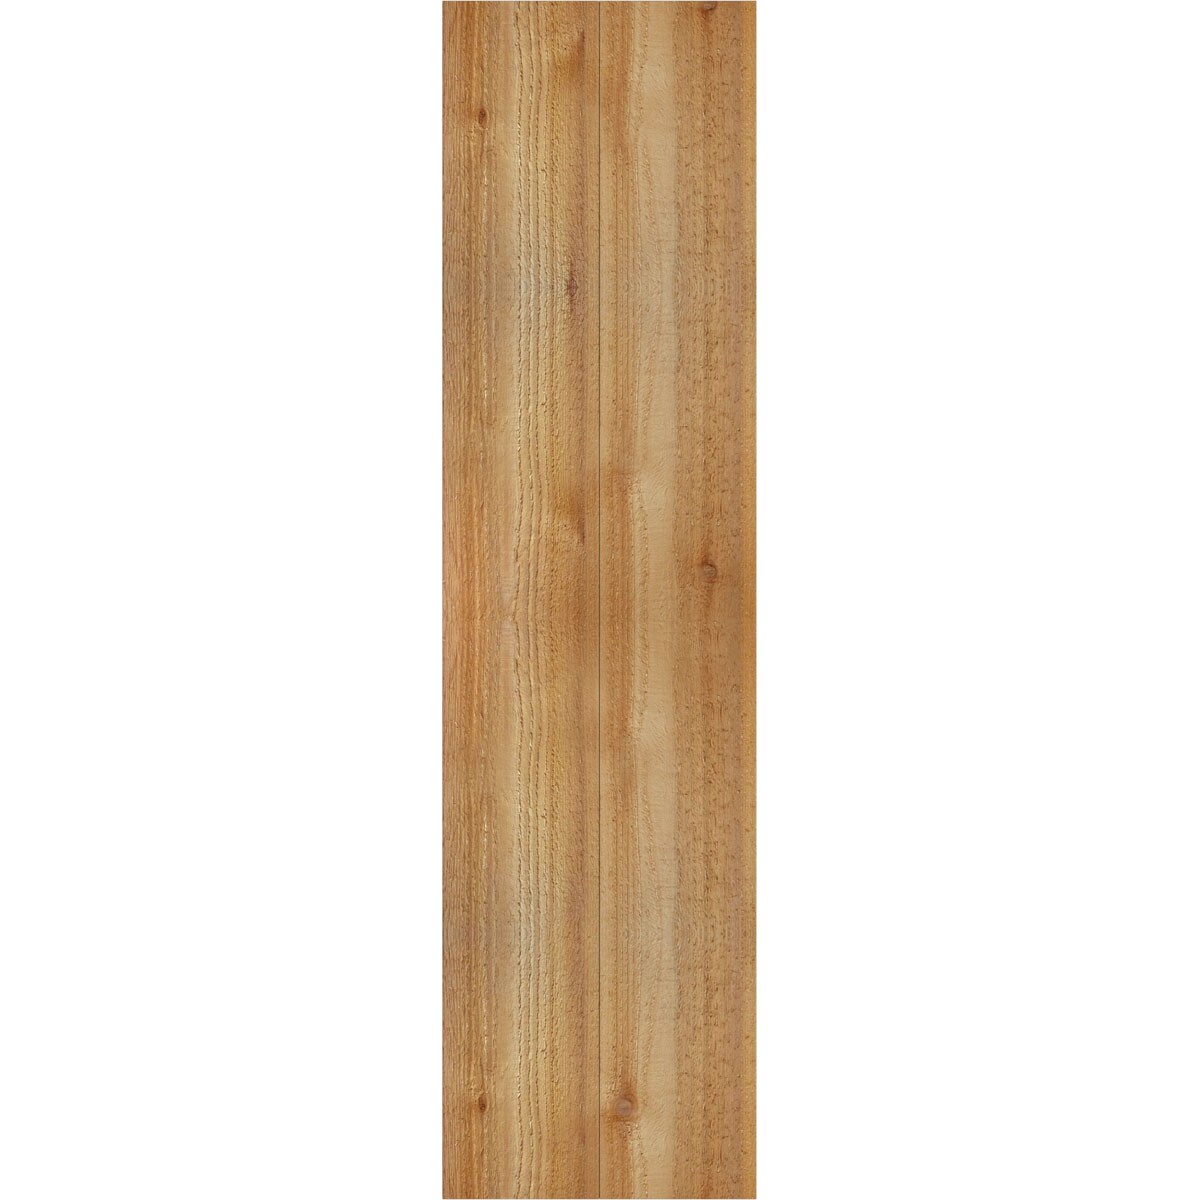 Ekena Millwork 2-Pack 10.75-in W x 41-in H Unfinished Board and Batten Wood Western Red cedar Exterior Shutters